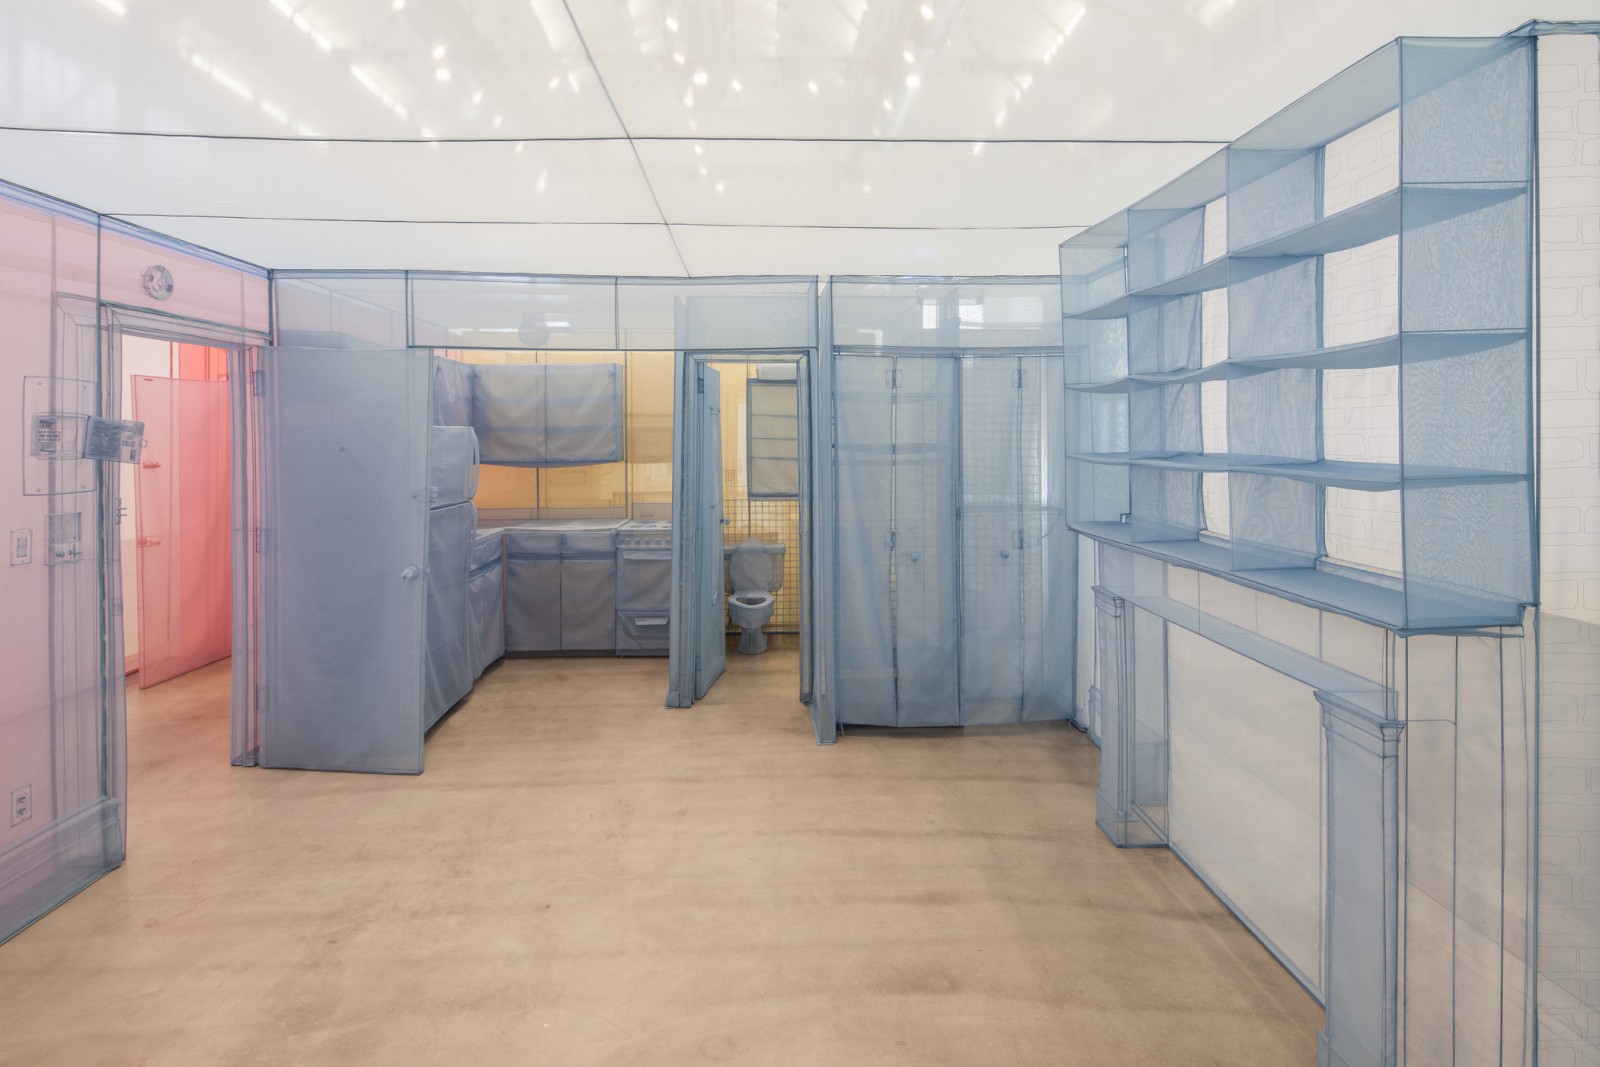 Image: Do Ho Suh, Apartment A, Unit 2, Corridor and Staircase, 348 West 22nd Street, New York, NY 10011, USA (detail), 2011-2014